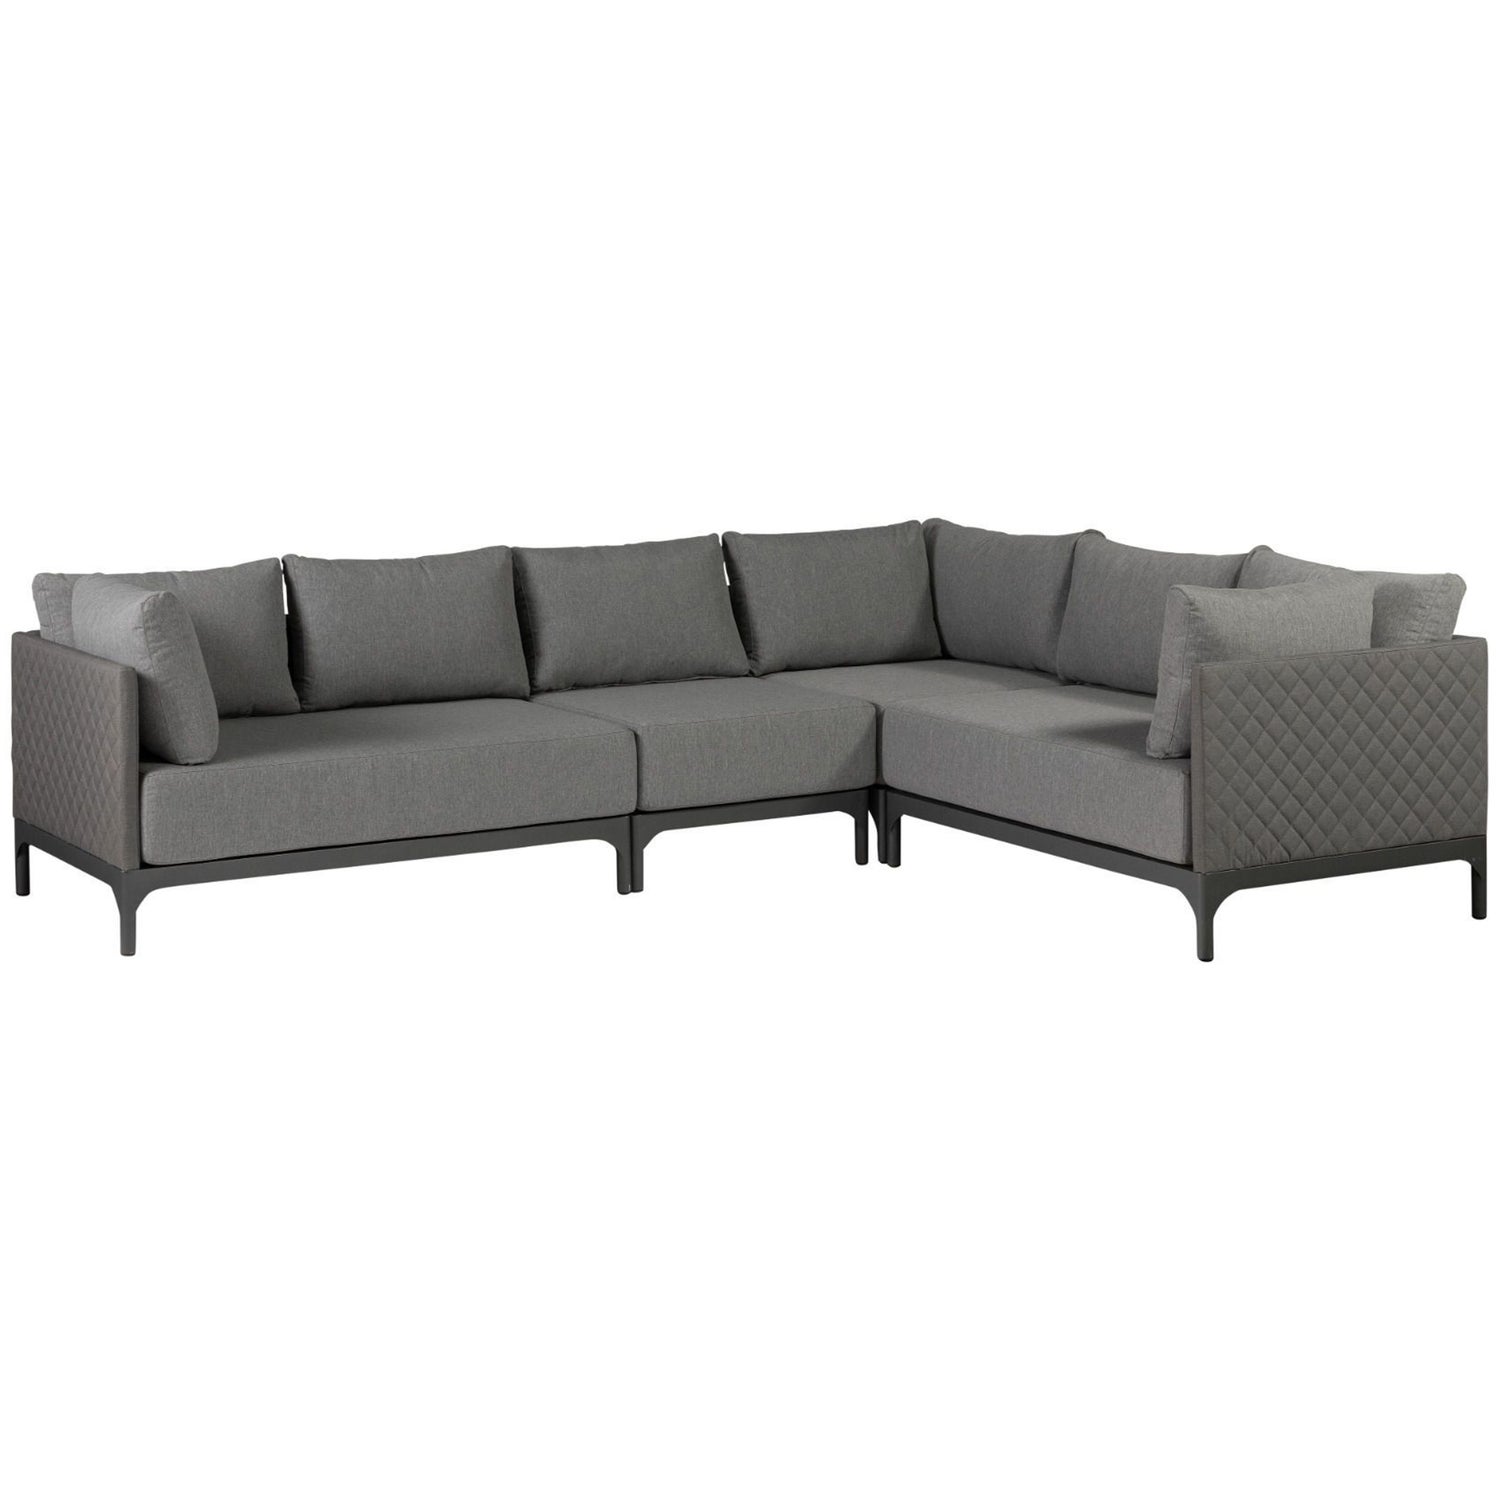 CH3055ALU-01_VS_EXT_Domino_loungeset_stone_grey_SA.jpg?auto=webp&format=png&width=1500&height=1500